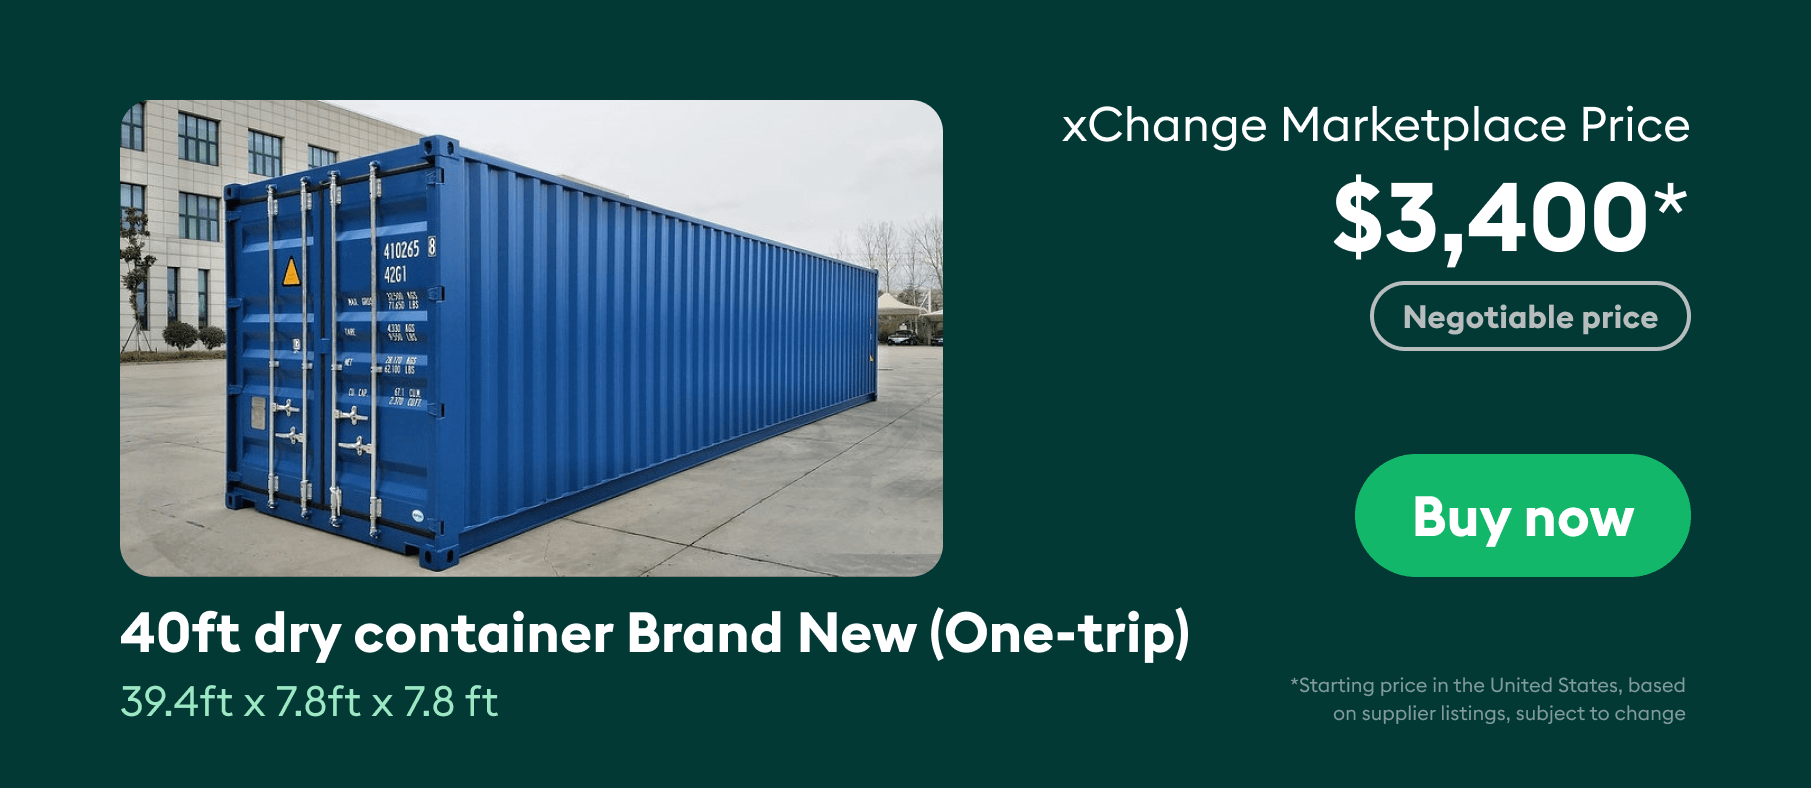 40ft brand new container costs around $3,400 on the xChange Marketplace.